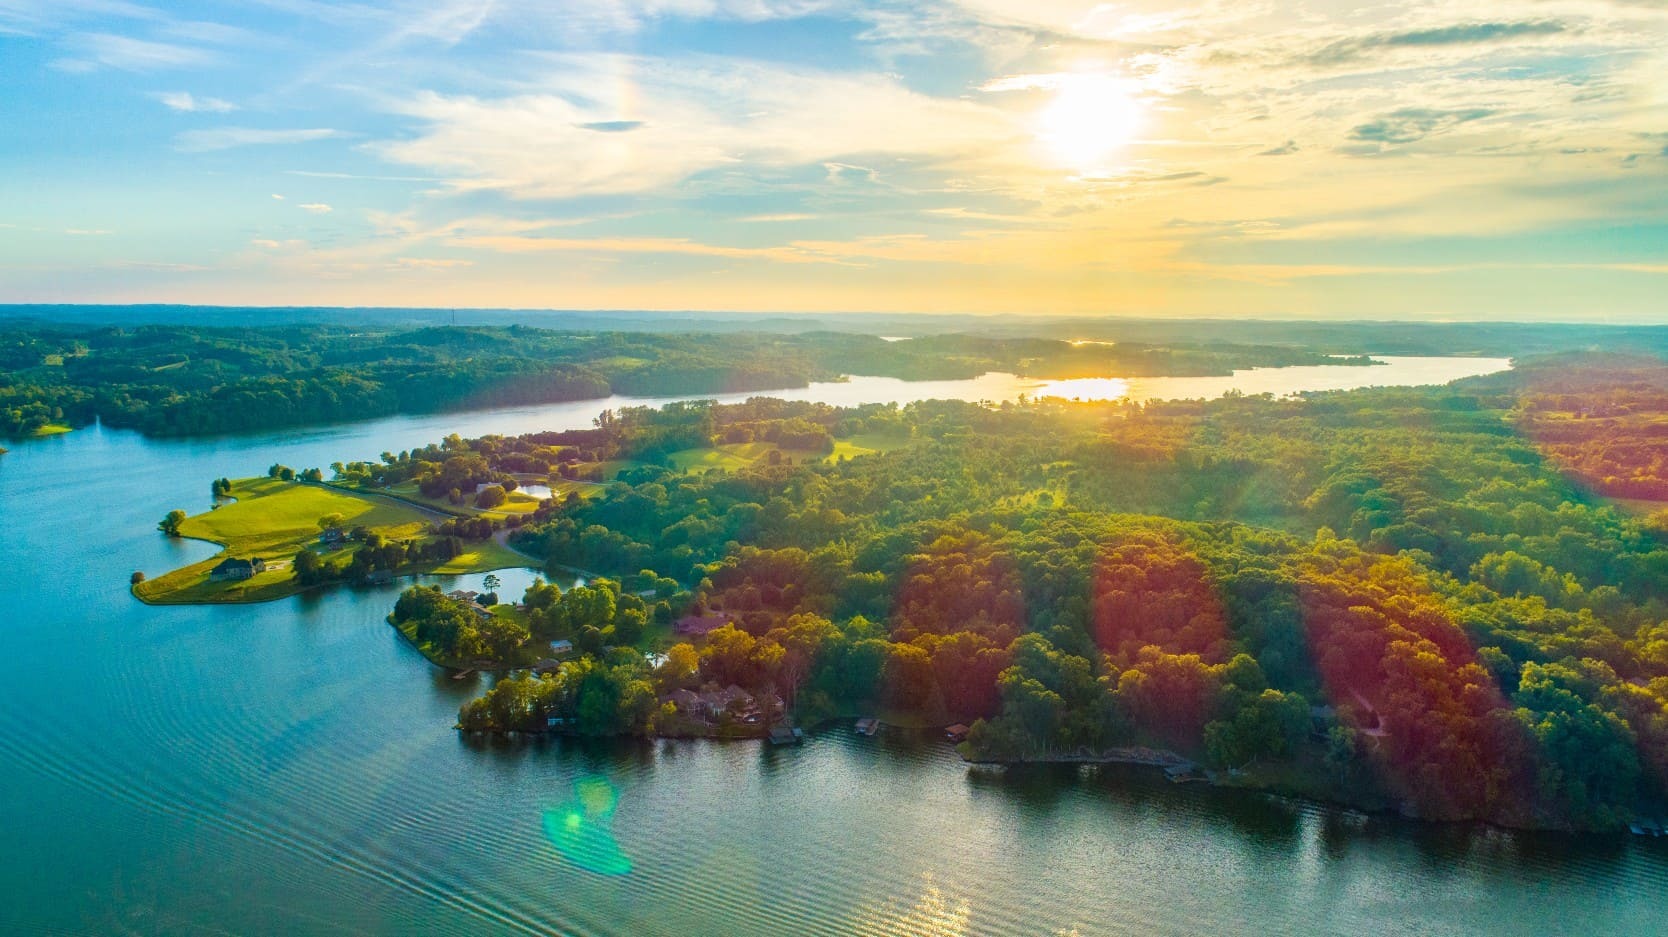 Aerial view of Fort Loudon Lake near the Knoxville suburb of Farragut, Tennessee